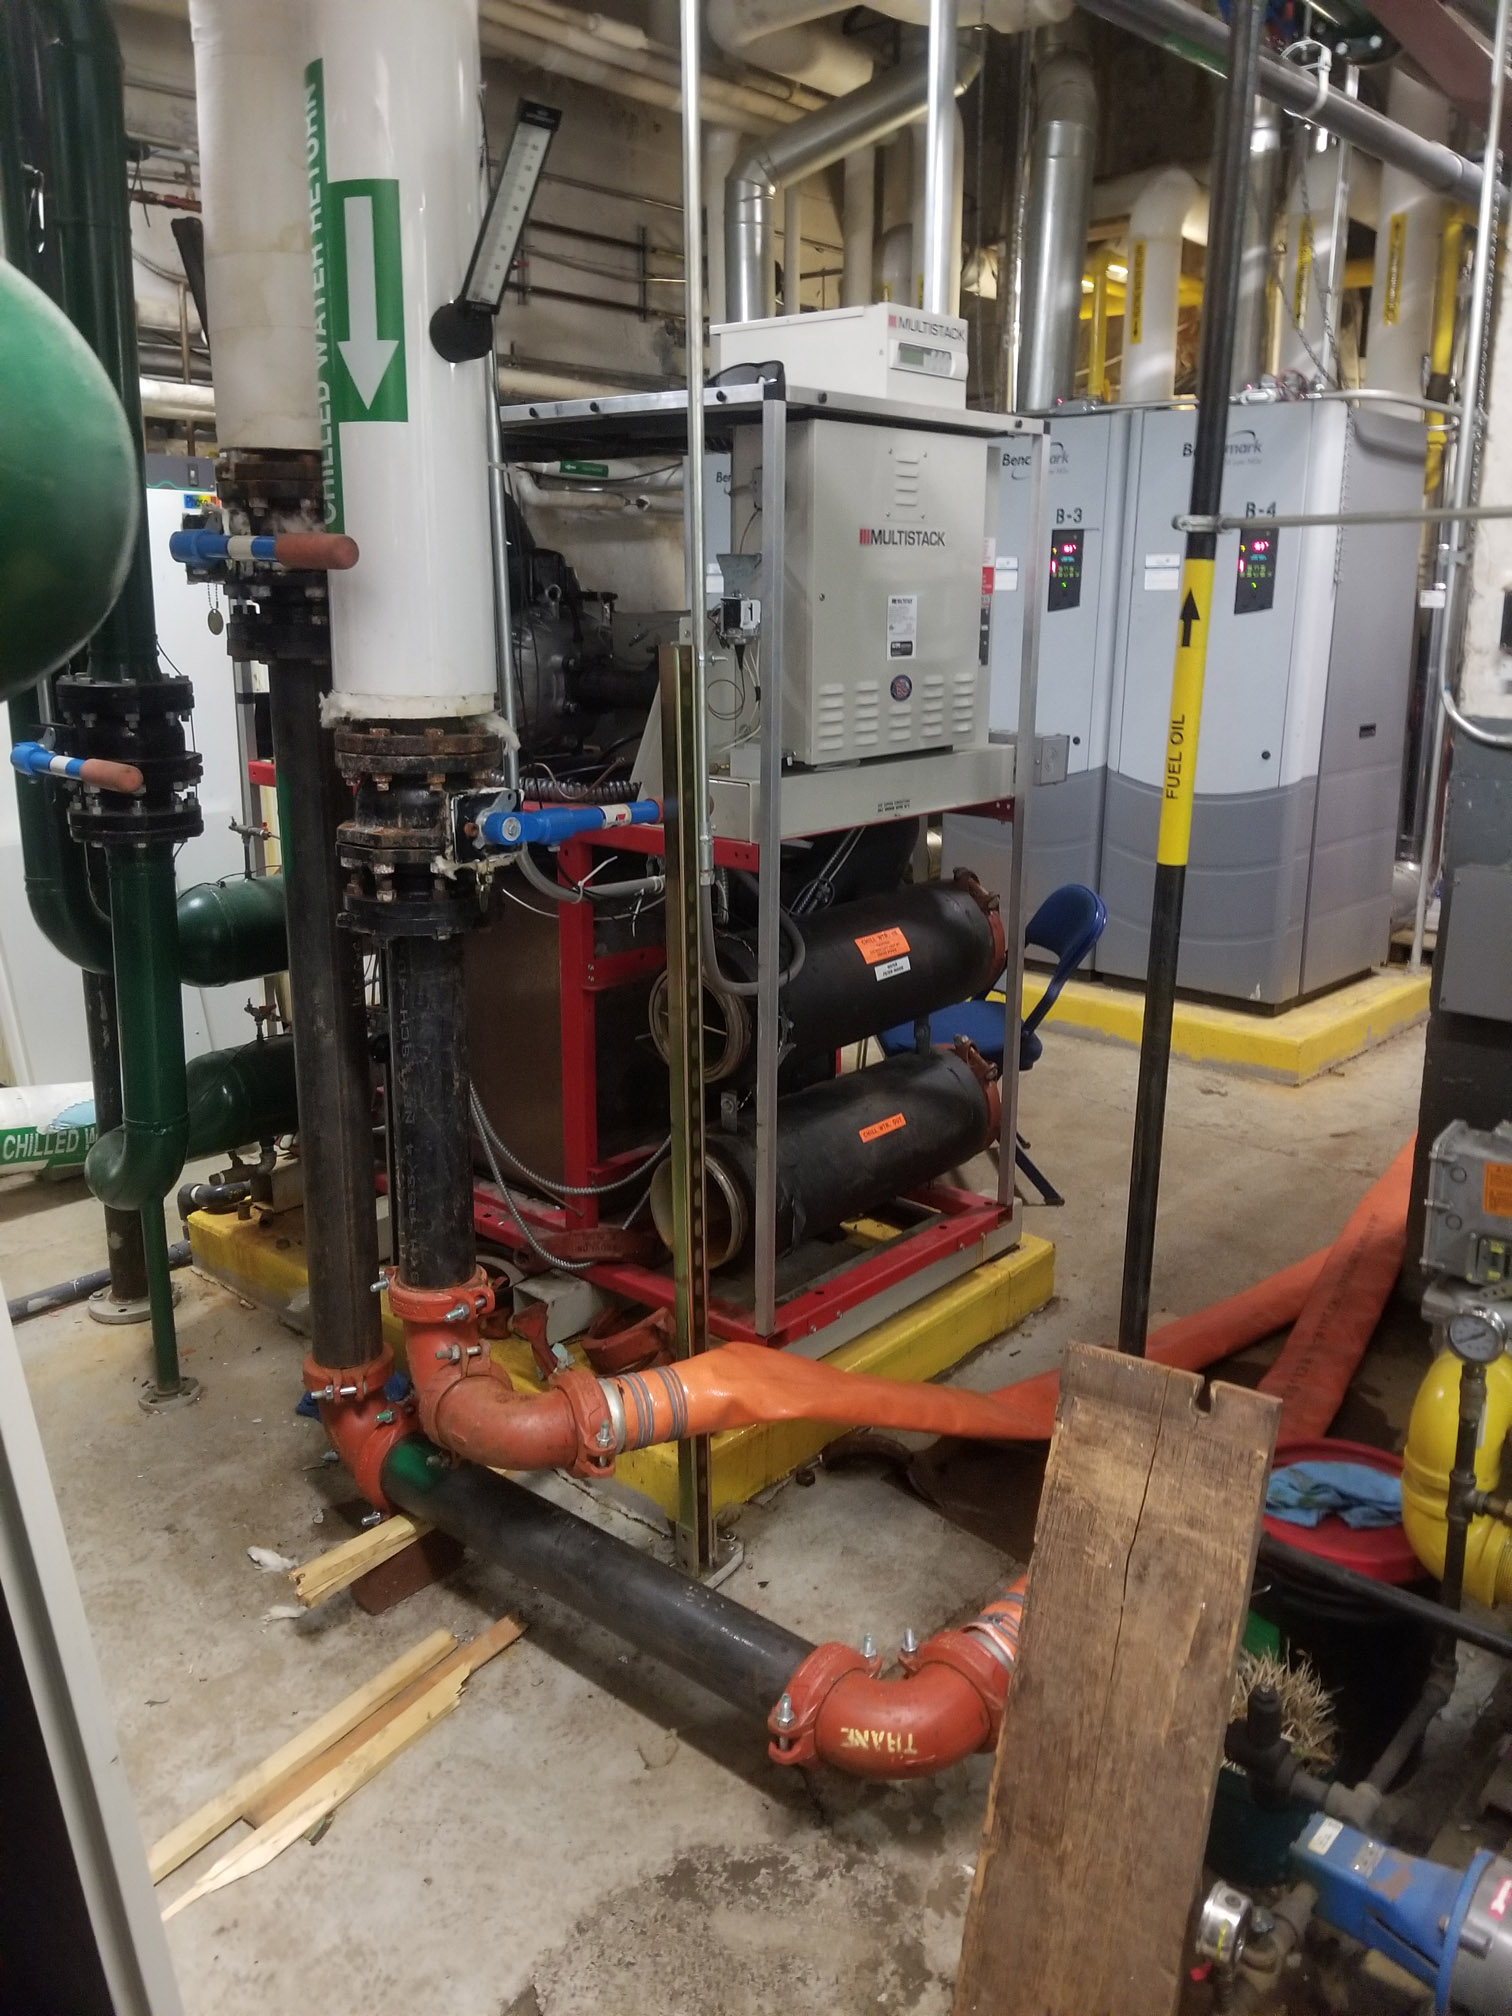 Air Cooled Chiller Rental Hendry County FL, Chiller AC Rental Hendry County FL, Temporary Chiller Hendry County FL, Rental Chiller Installation Hendry County FL